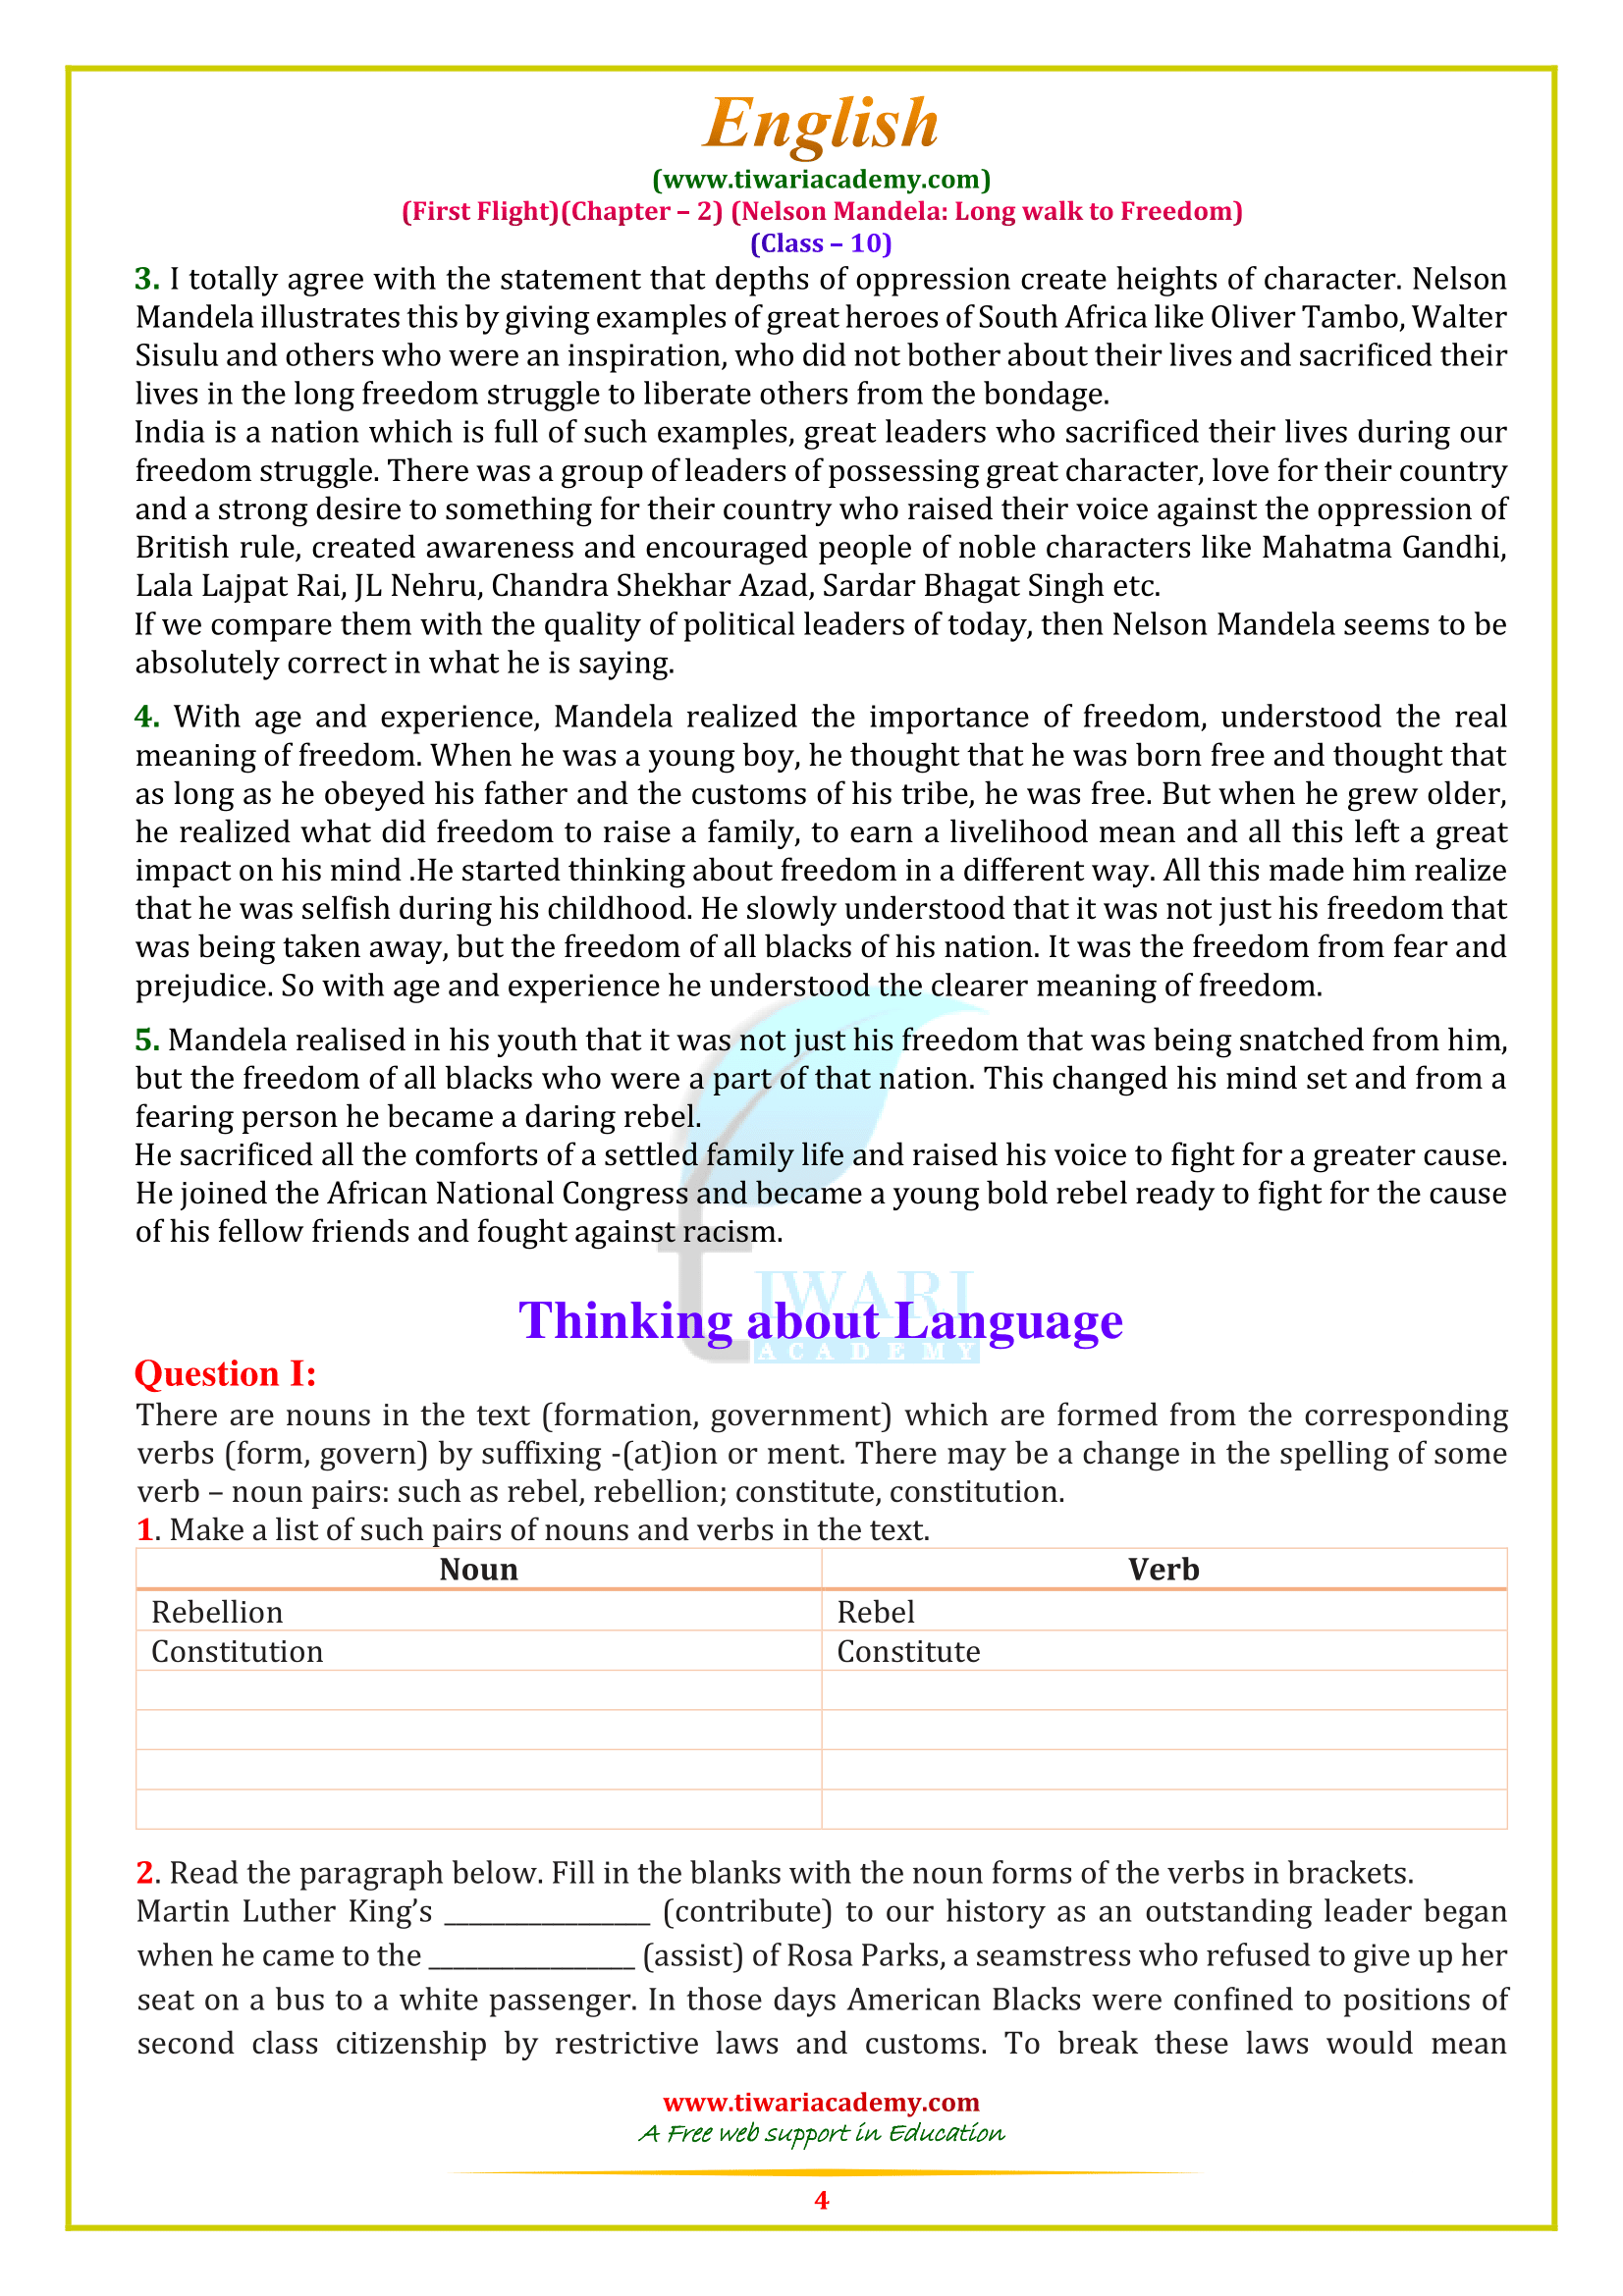 NCERT Solutions for Class 10 English First Flight Chapter 2 all questions